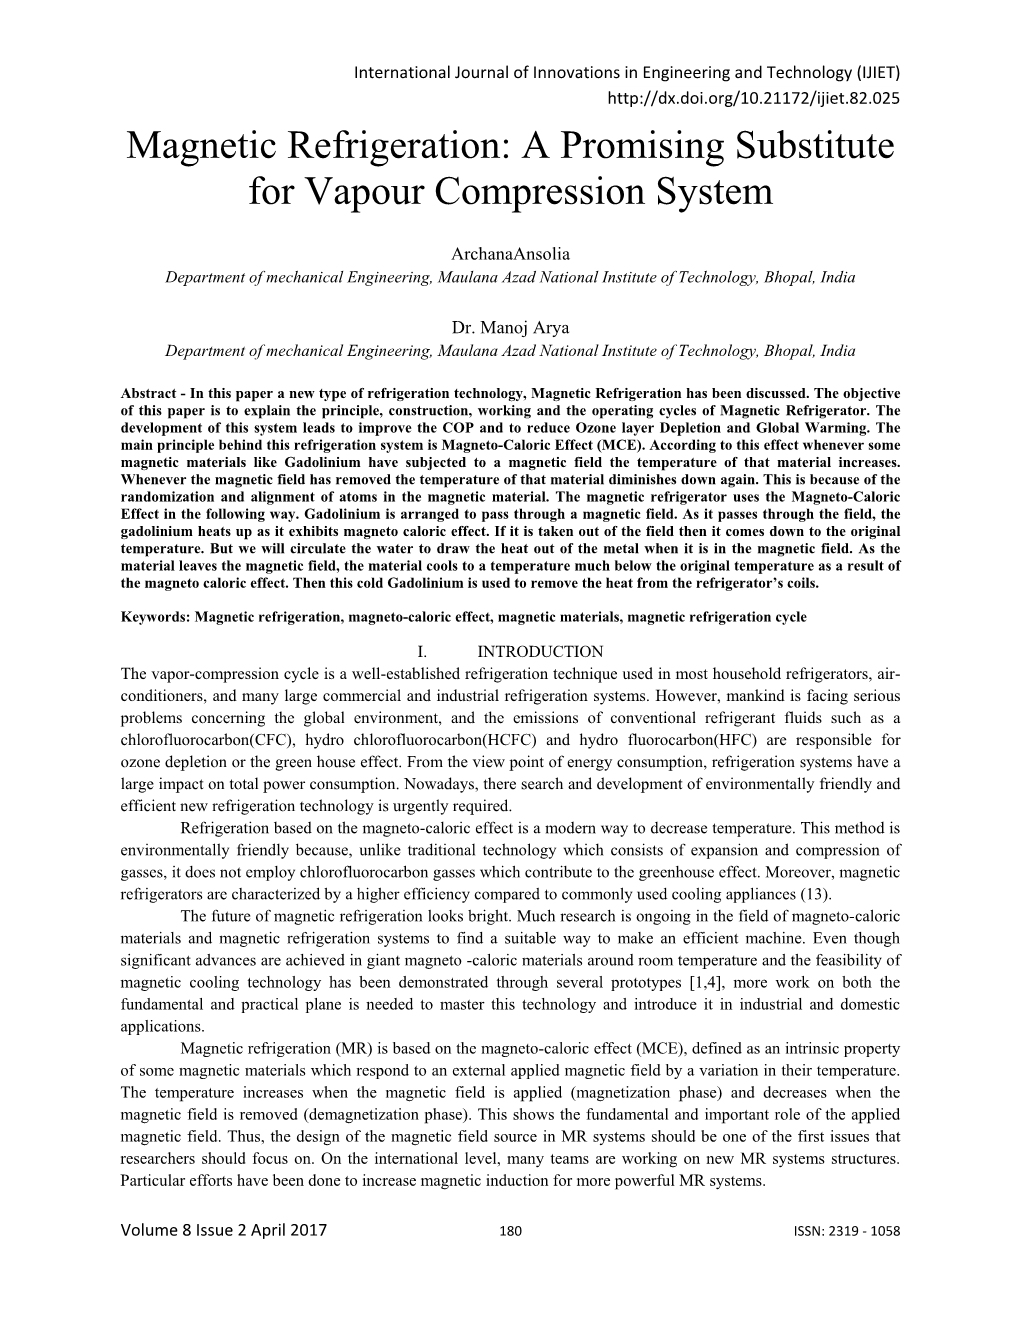 Magnetic Refrigeration: a Promising Substitute for Vapour Compression System